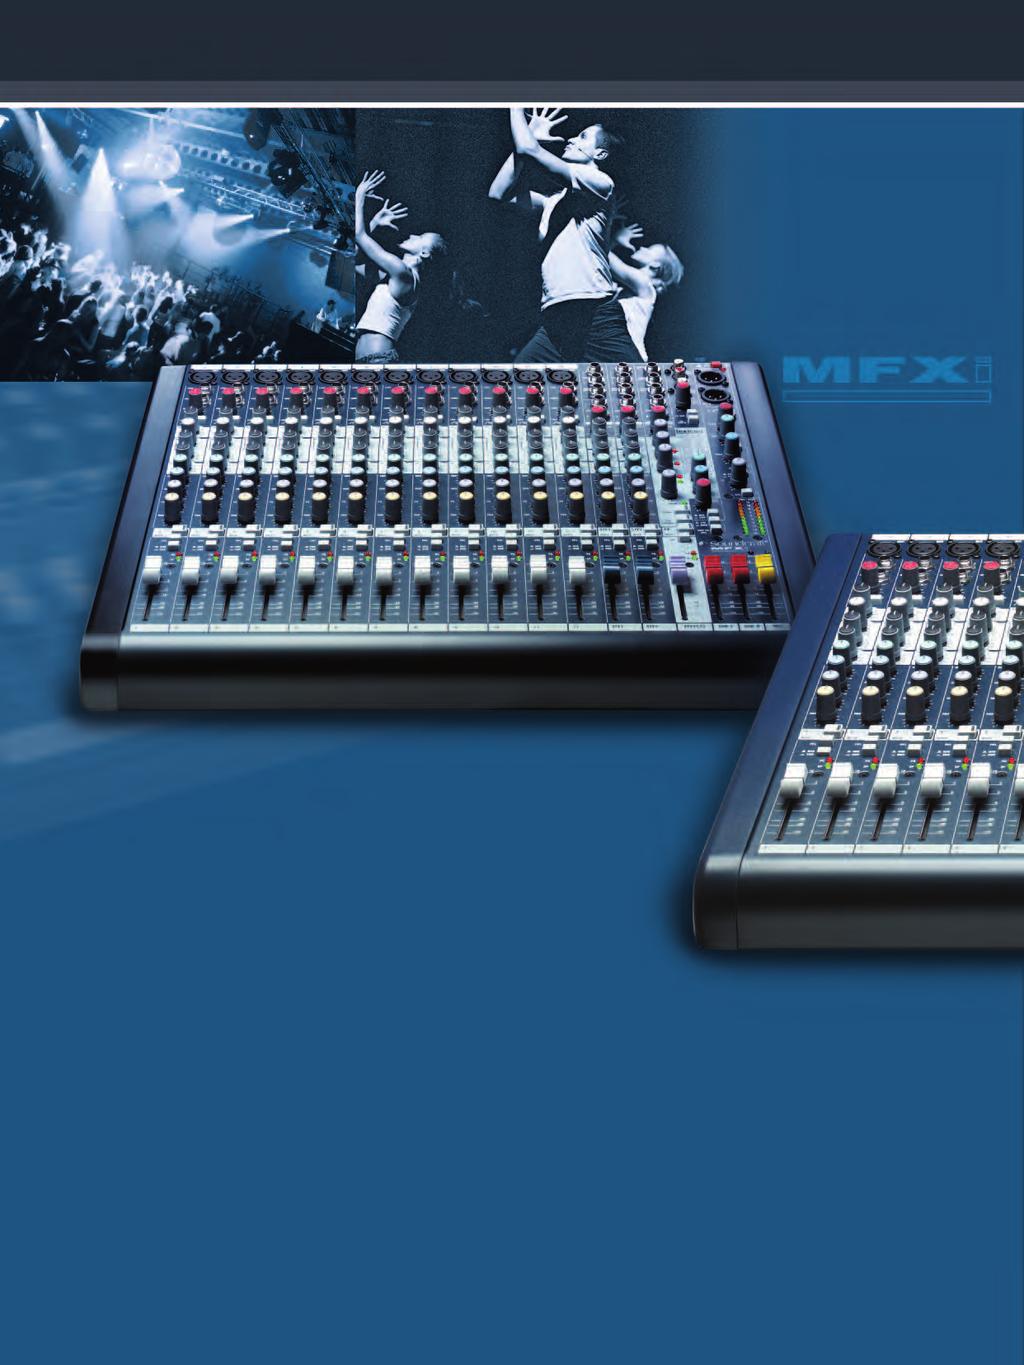 MFXi/MPMi Soundcraft MFXi/MPMi mixers are compact and ideally equipped for live sound applications including fixed installations, houses of worship and portable PA.